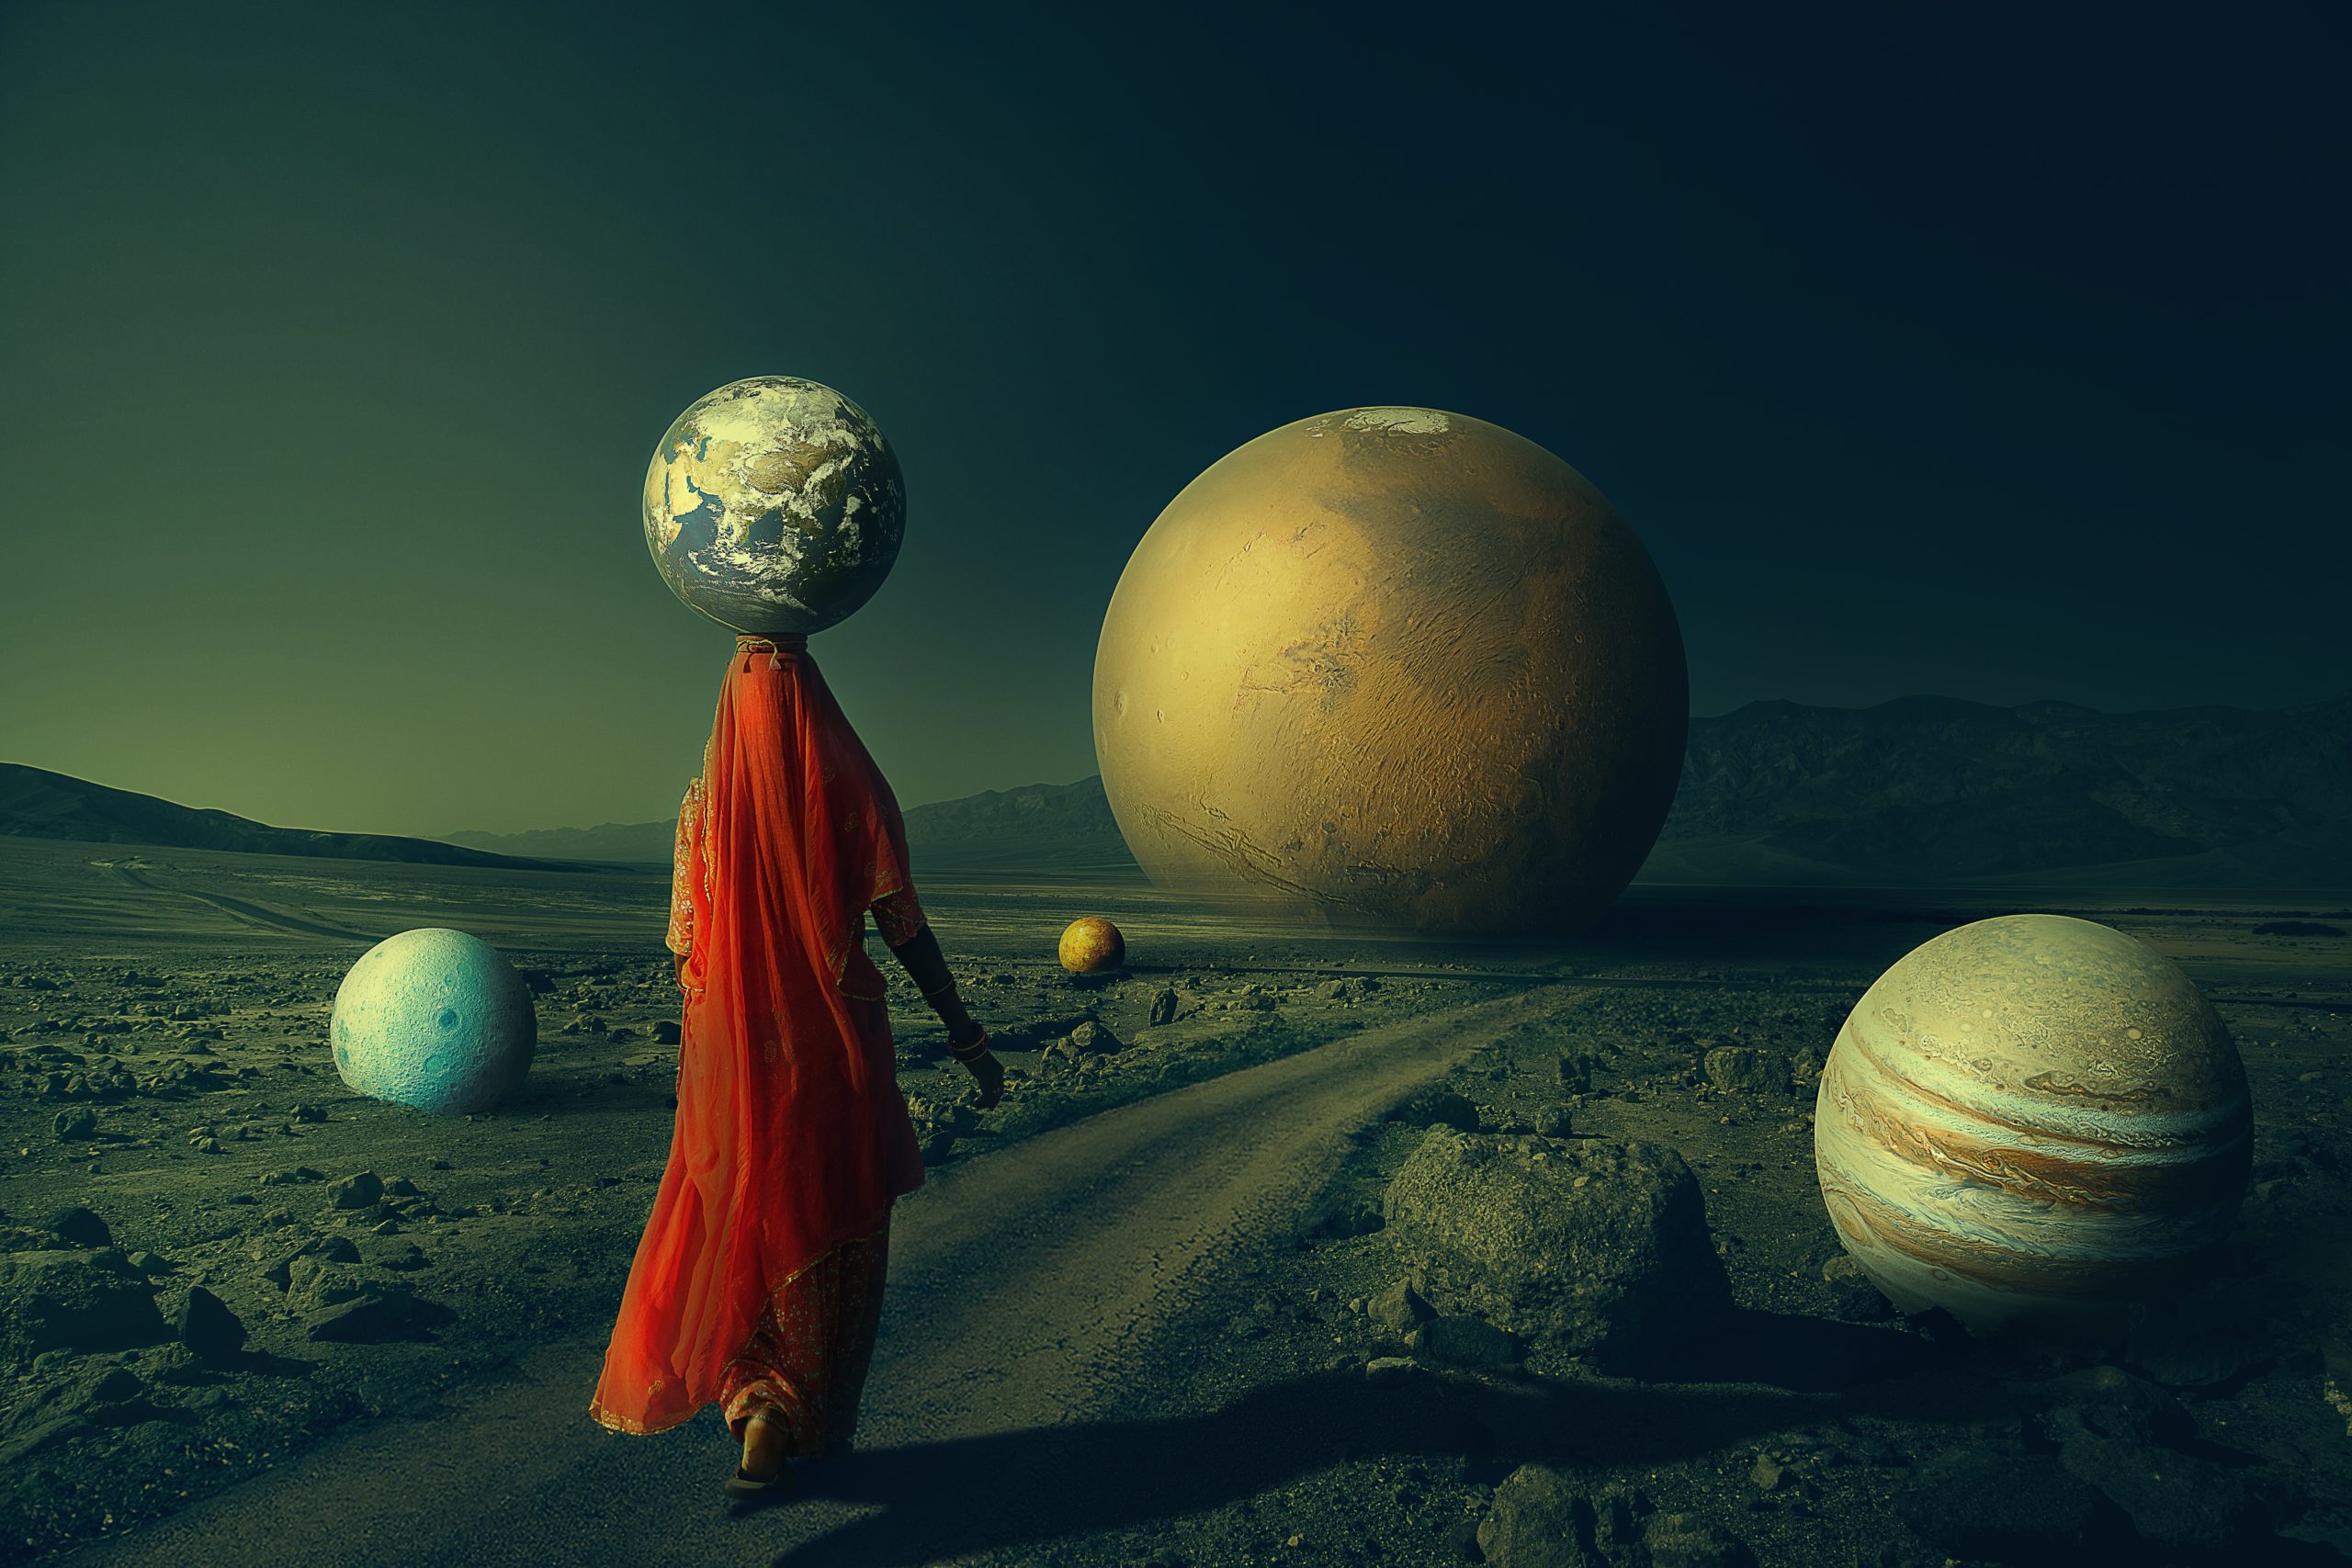 Stylized photo of a woman walking through a rugged desert, surrounded by planets, with the planet earth balanced on her head